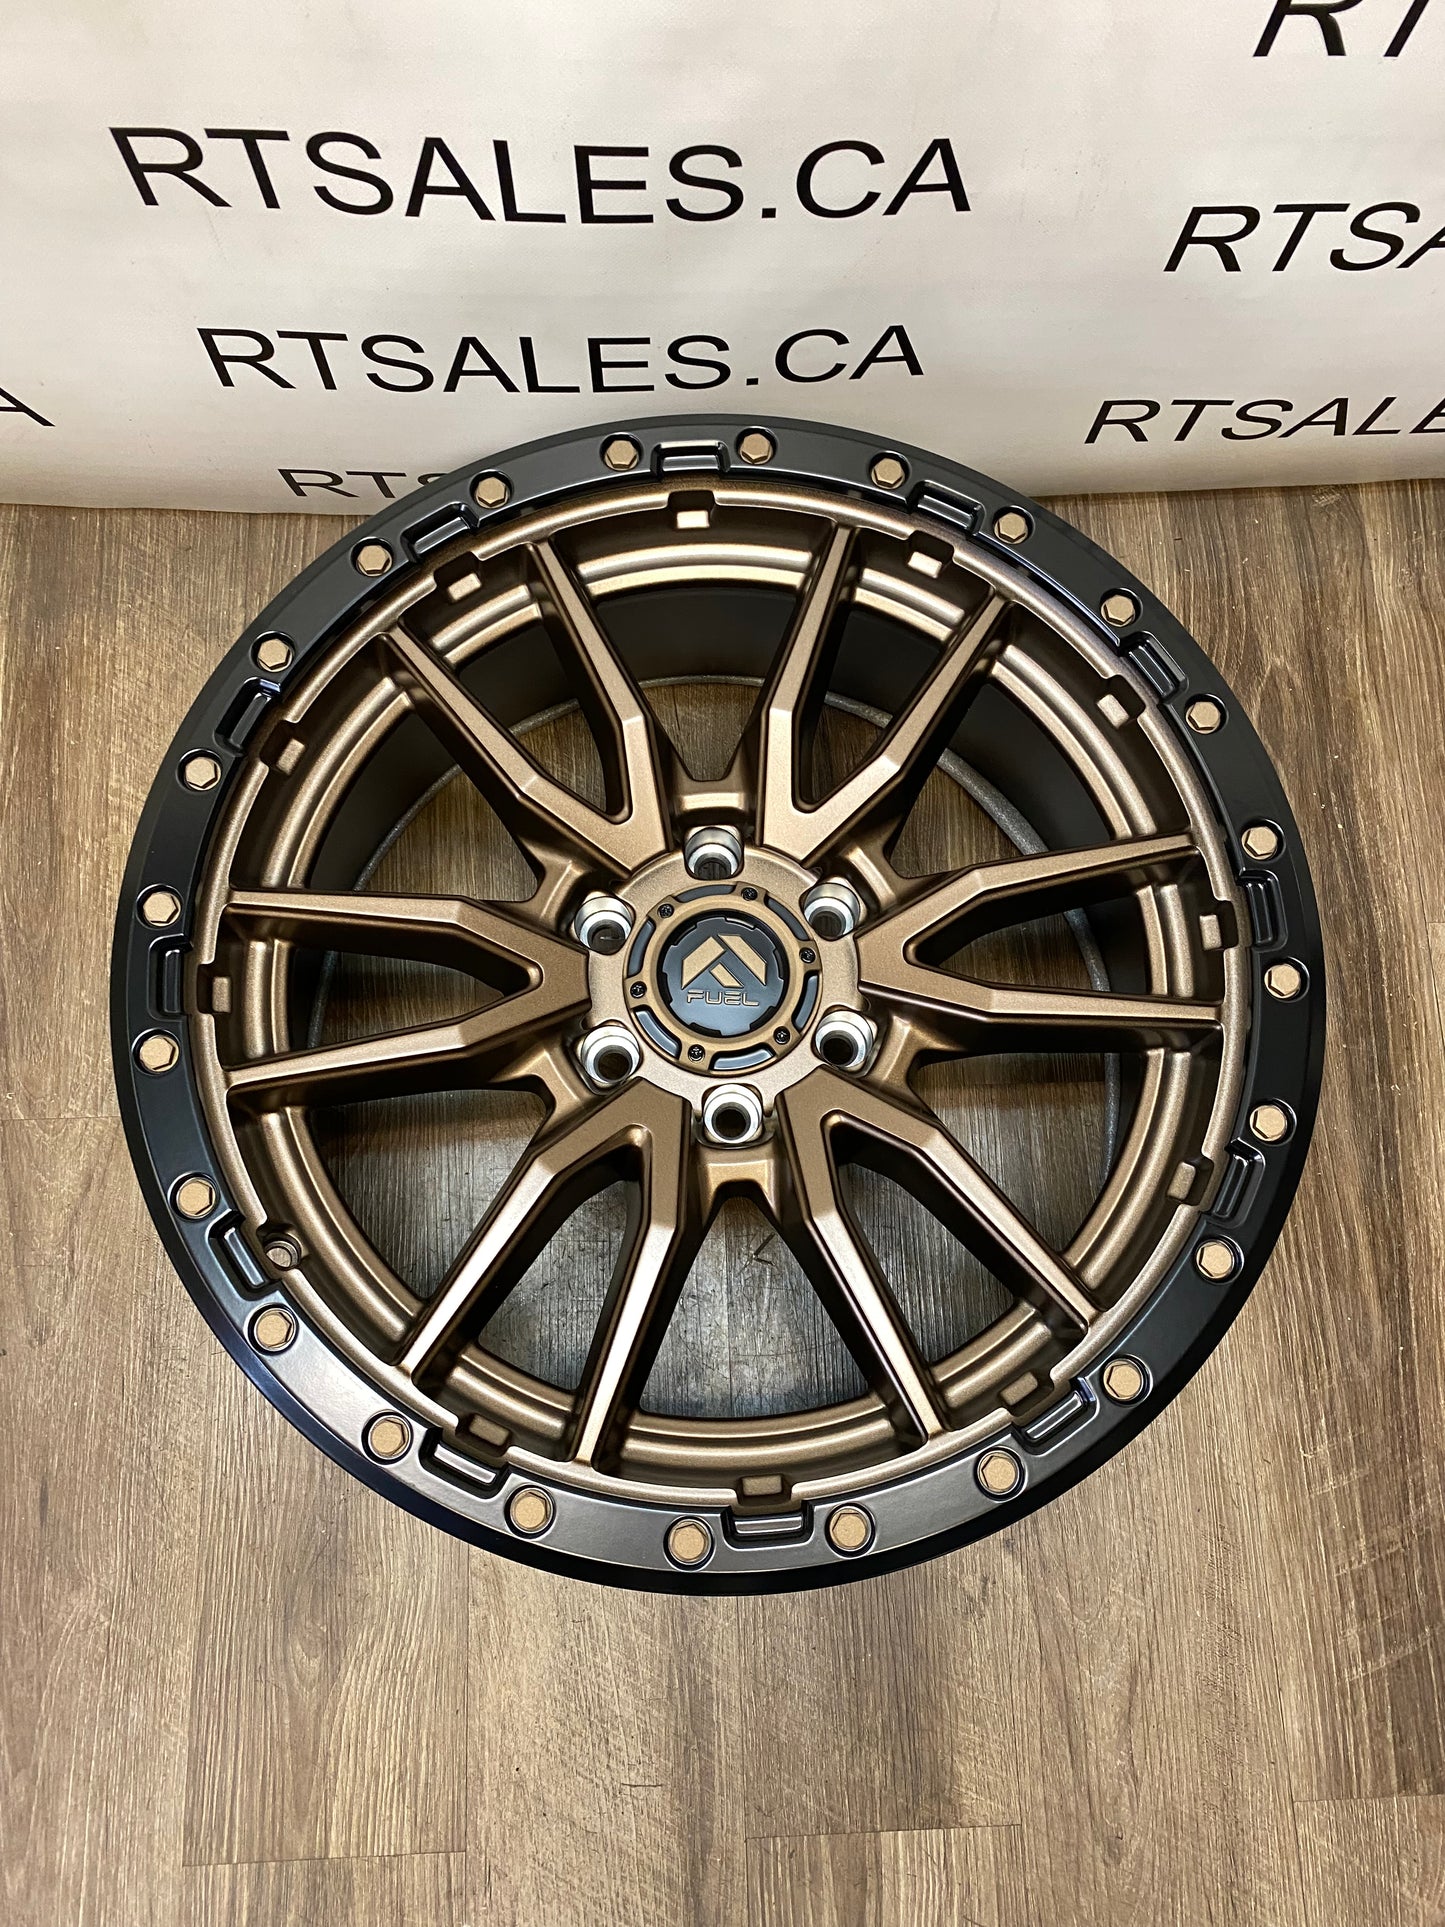 20x9 Fuel Rebel Rims 6x135 Ford F-150 Expedition